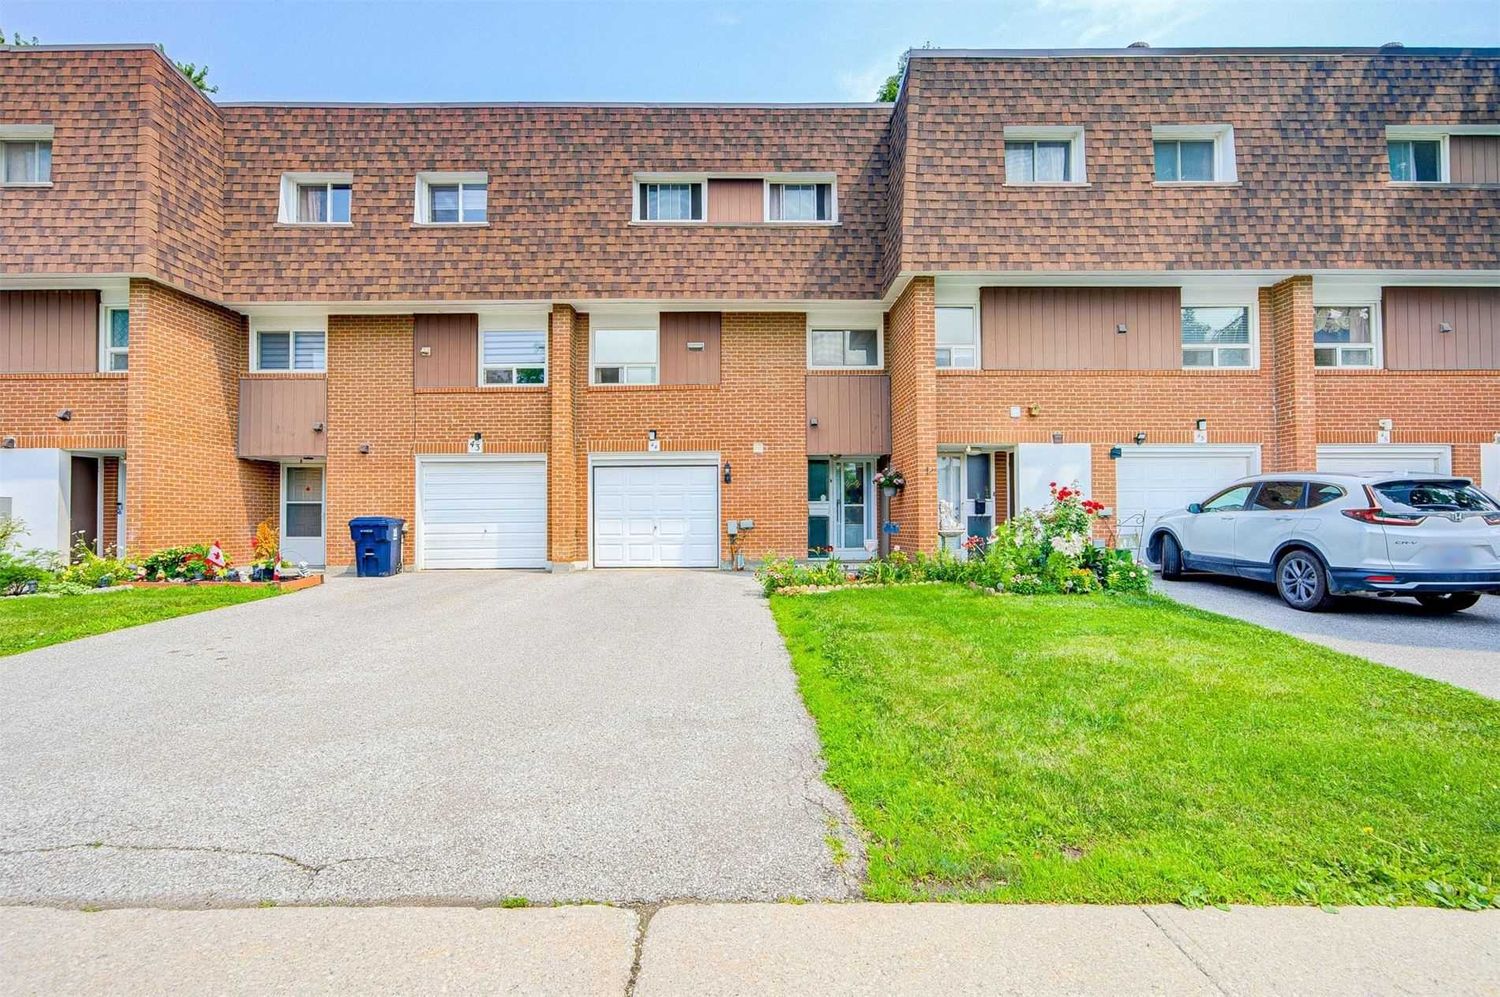 1667-1673 Albion Road. Albion Road Townhomes is located in  Etobicoke, Toronto - image #1 of 2